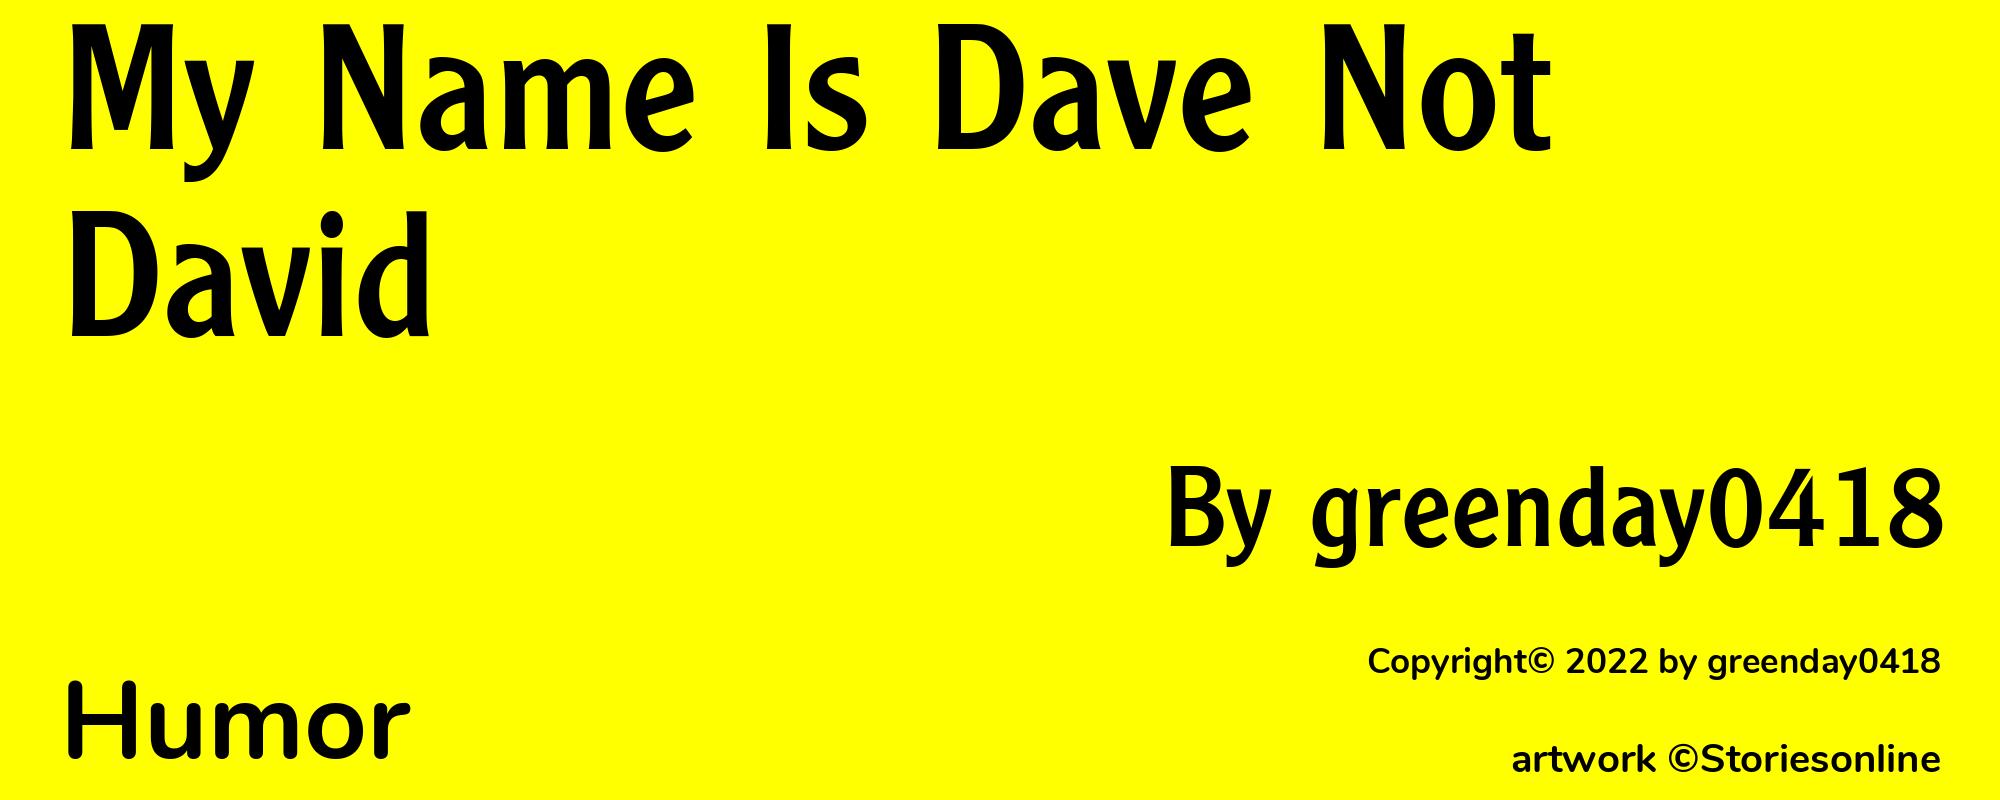 My Name Is Dave Not David - Cover